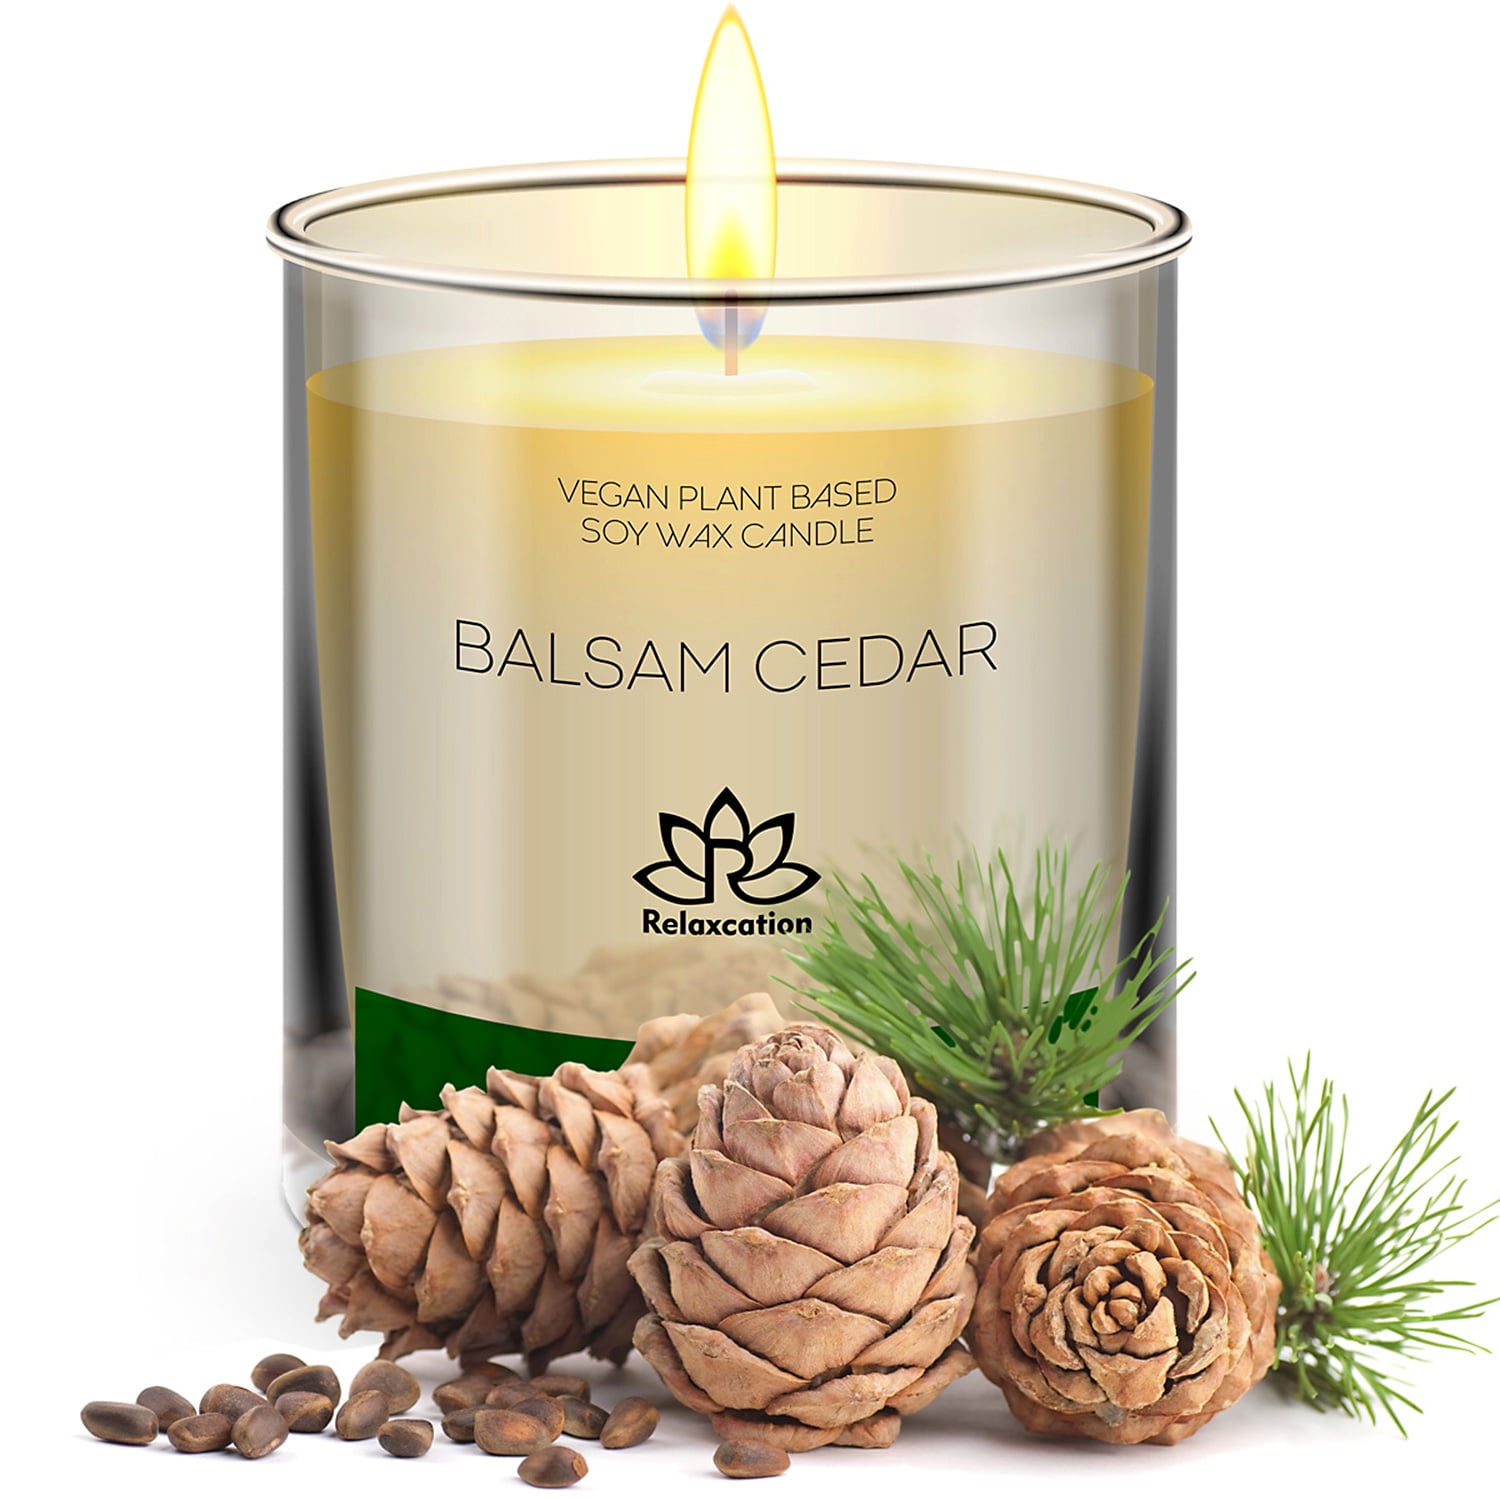 Highly Scented Vase Candle Refill Balsam Pine Candle Premium Soy Paraffin Wax Blend Self-Trimming Wick 50 Hour Burn Time 